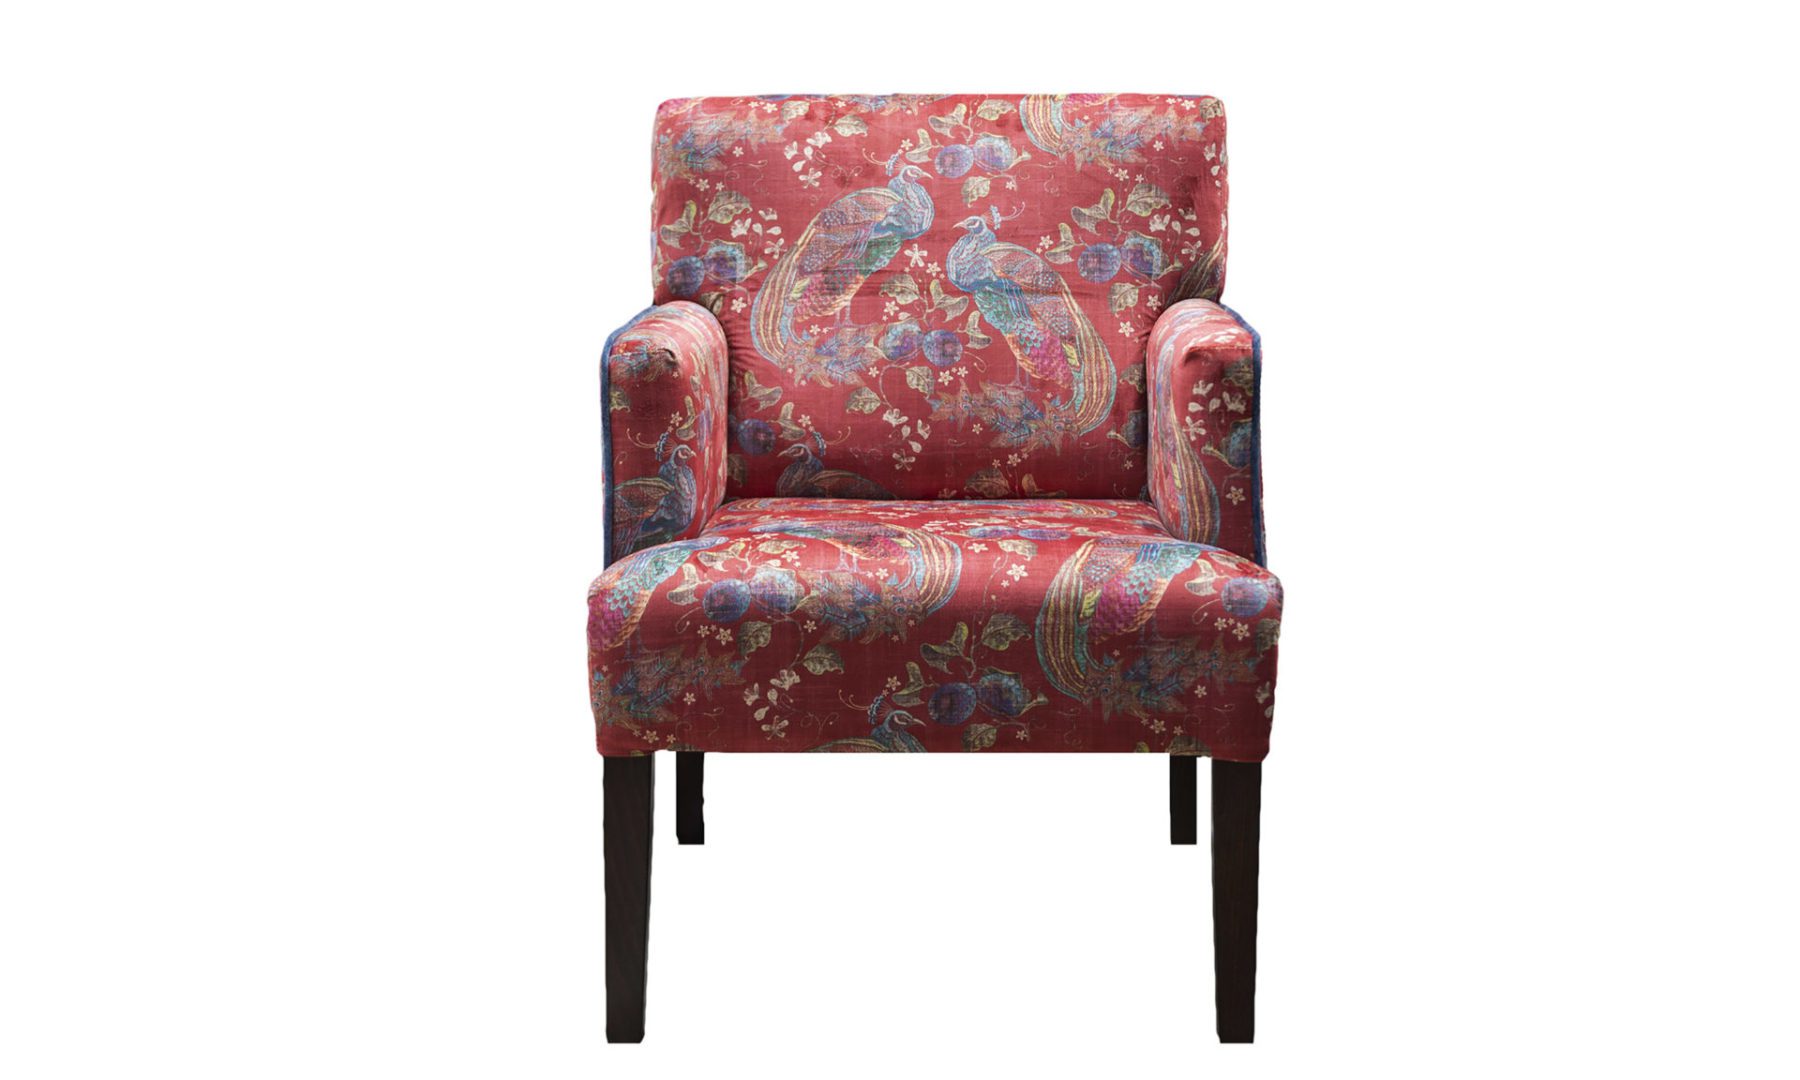 Lisa Chair in Peacock Cranberry, Platinum Collection Fabric - 405860